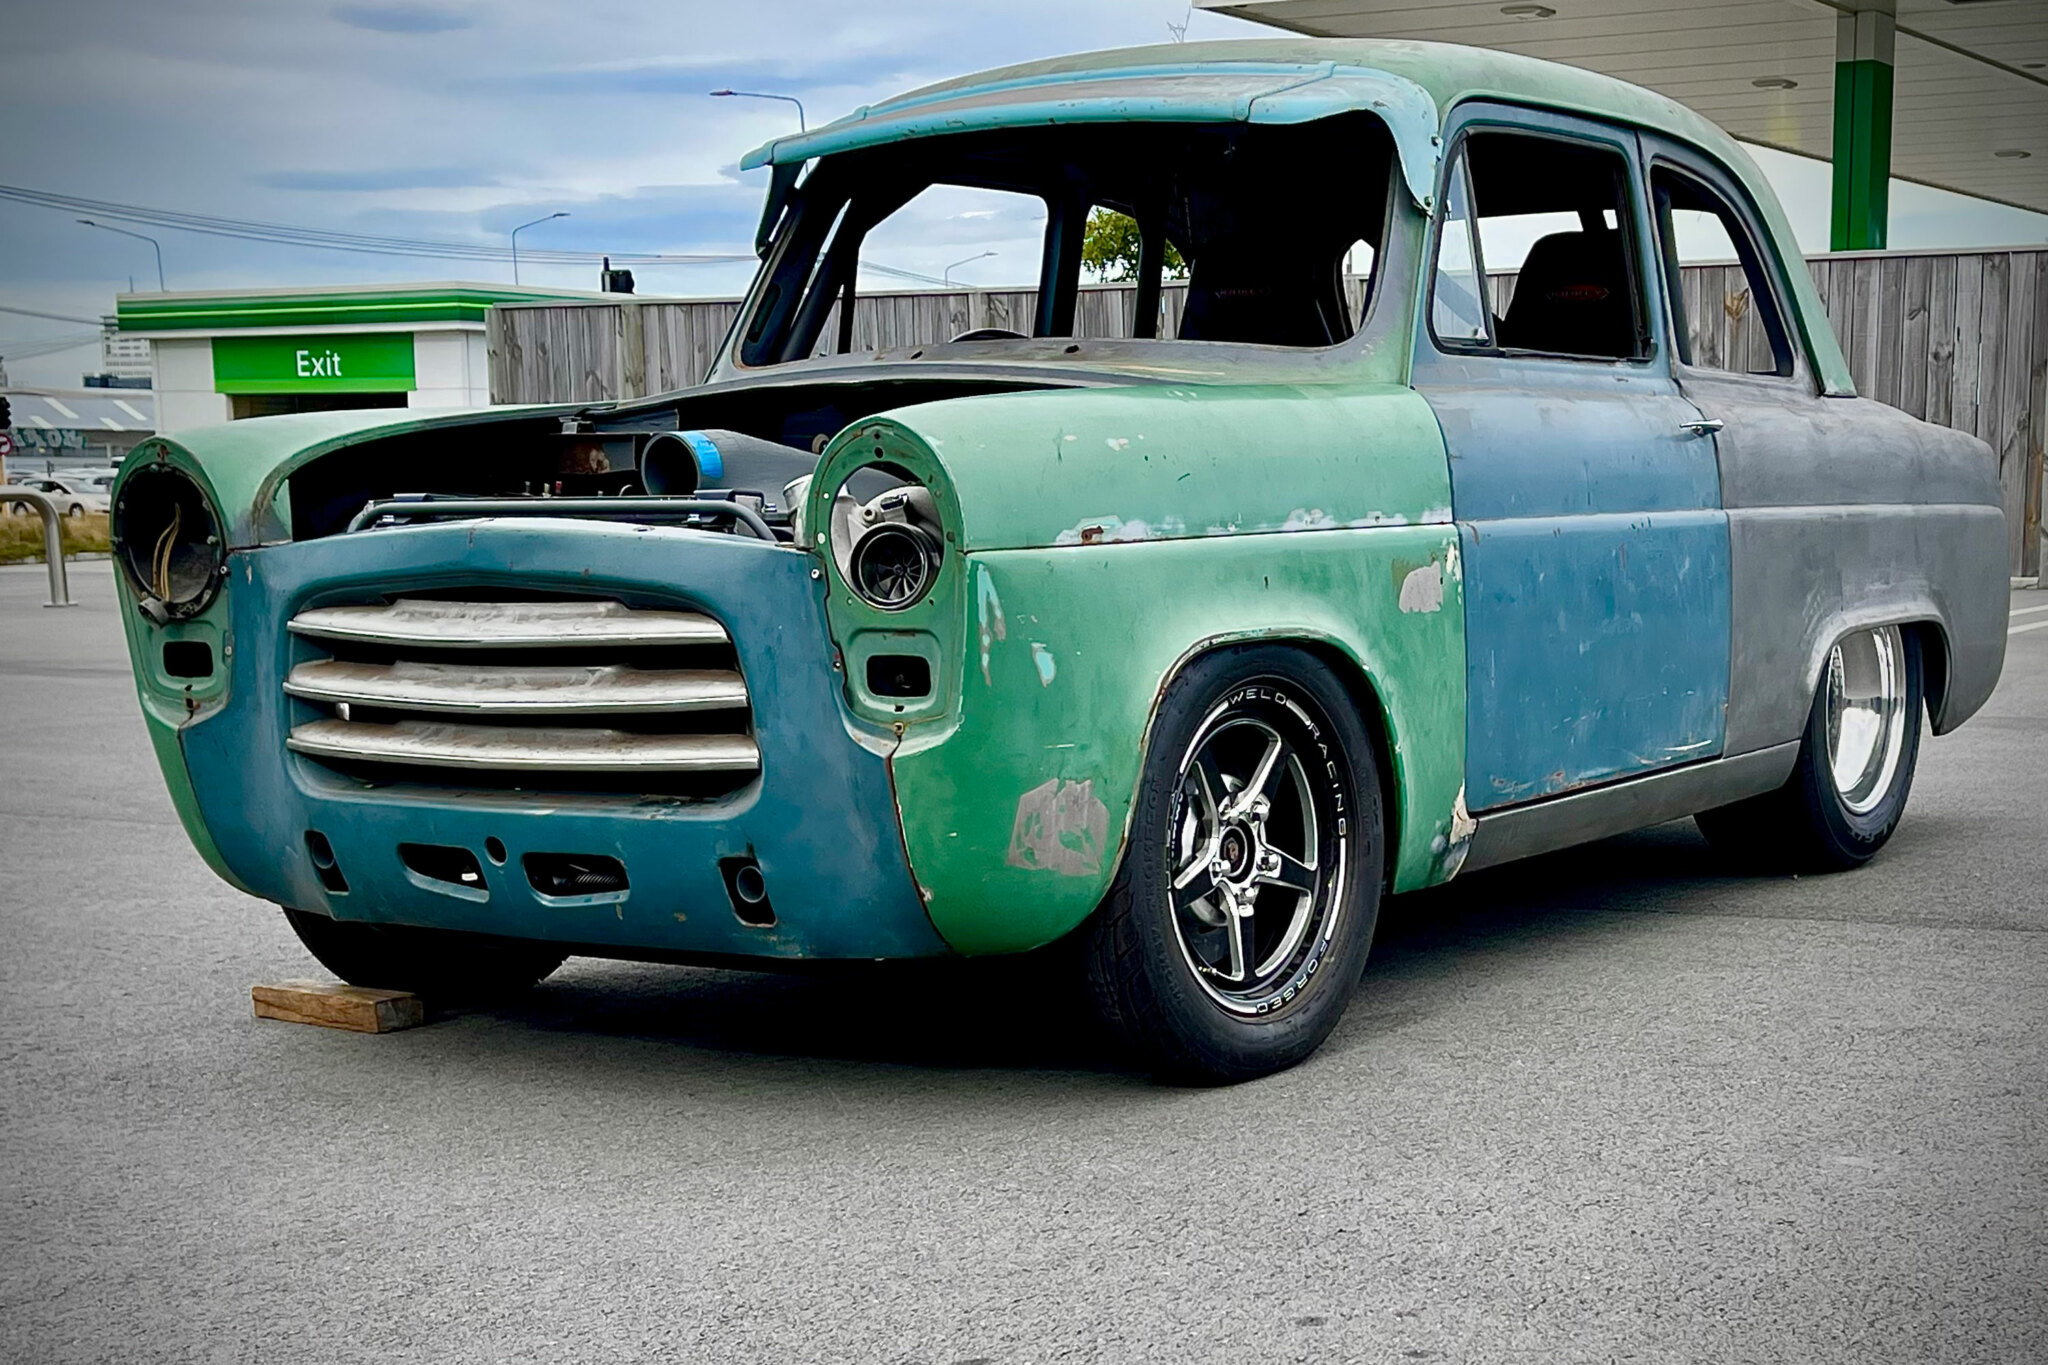 In the build: Turbo 1UZ-swapped ’55 Anglia, XD Falcon Tru-Blu tribute, pro street EH and more!